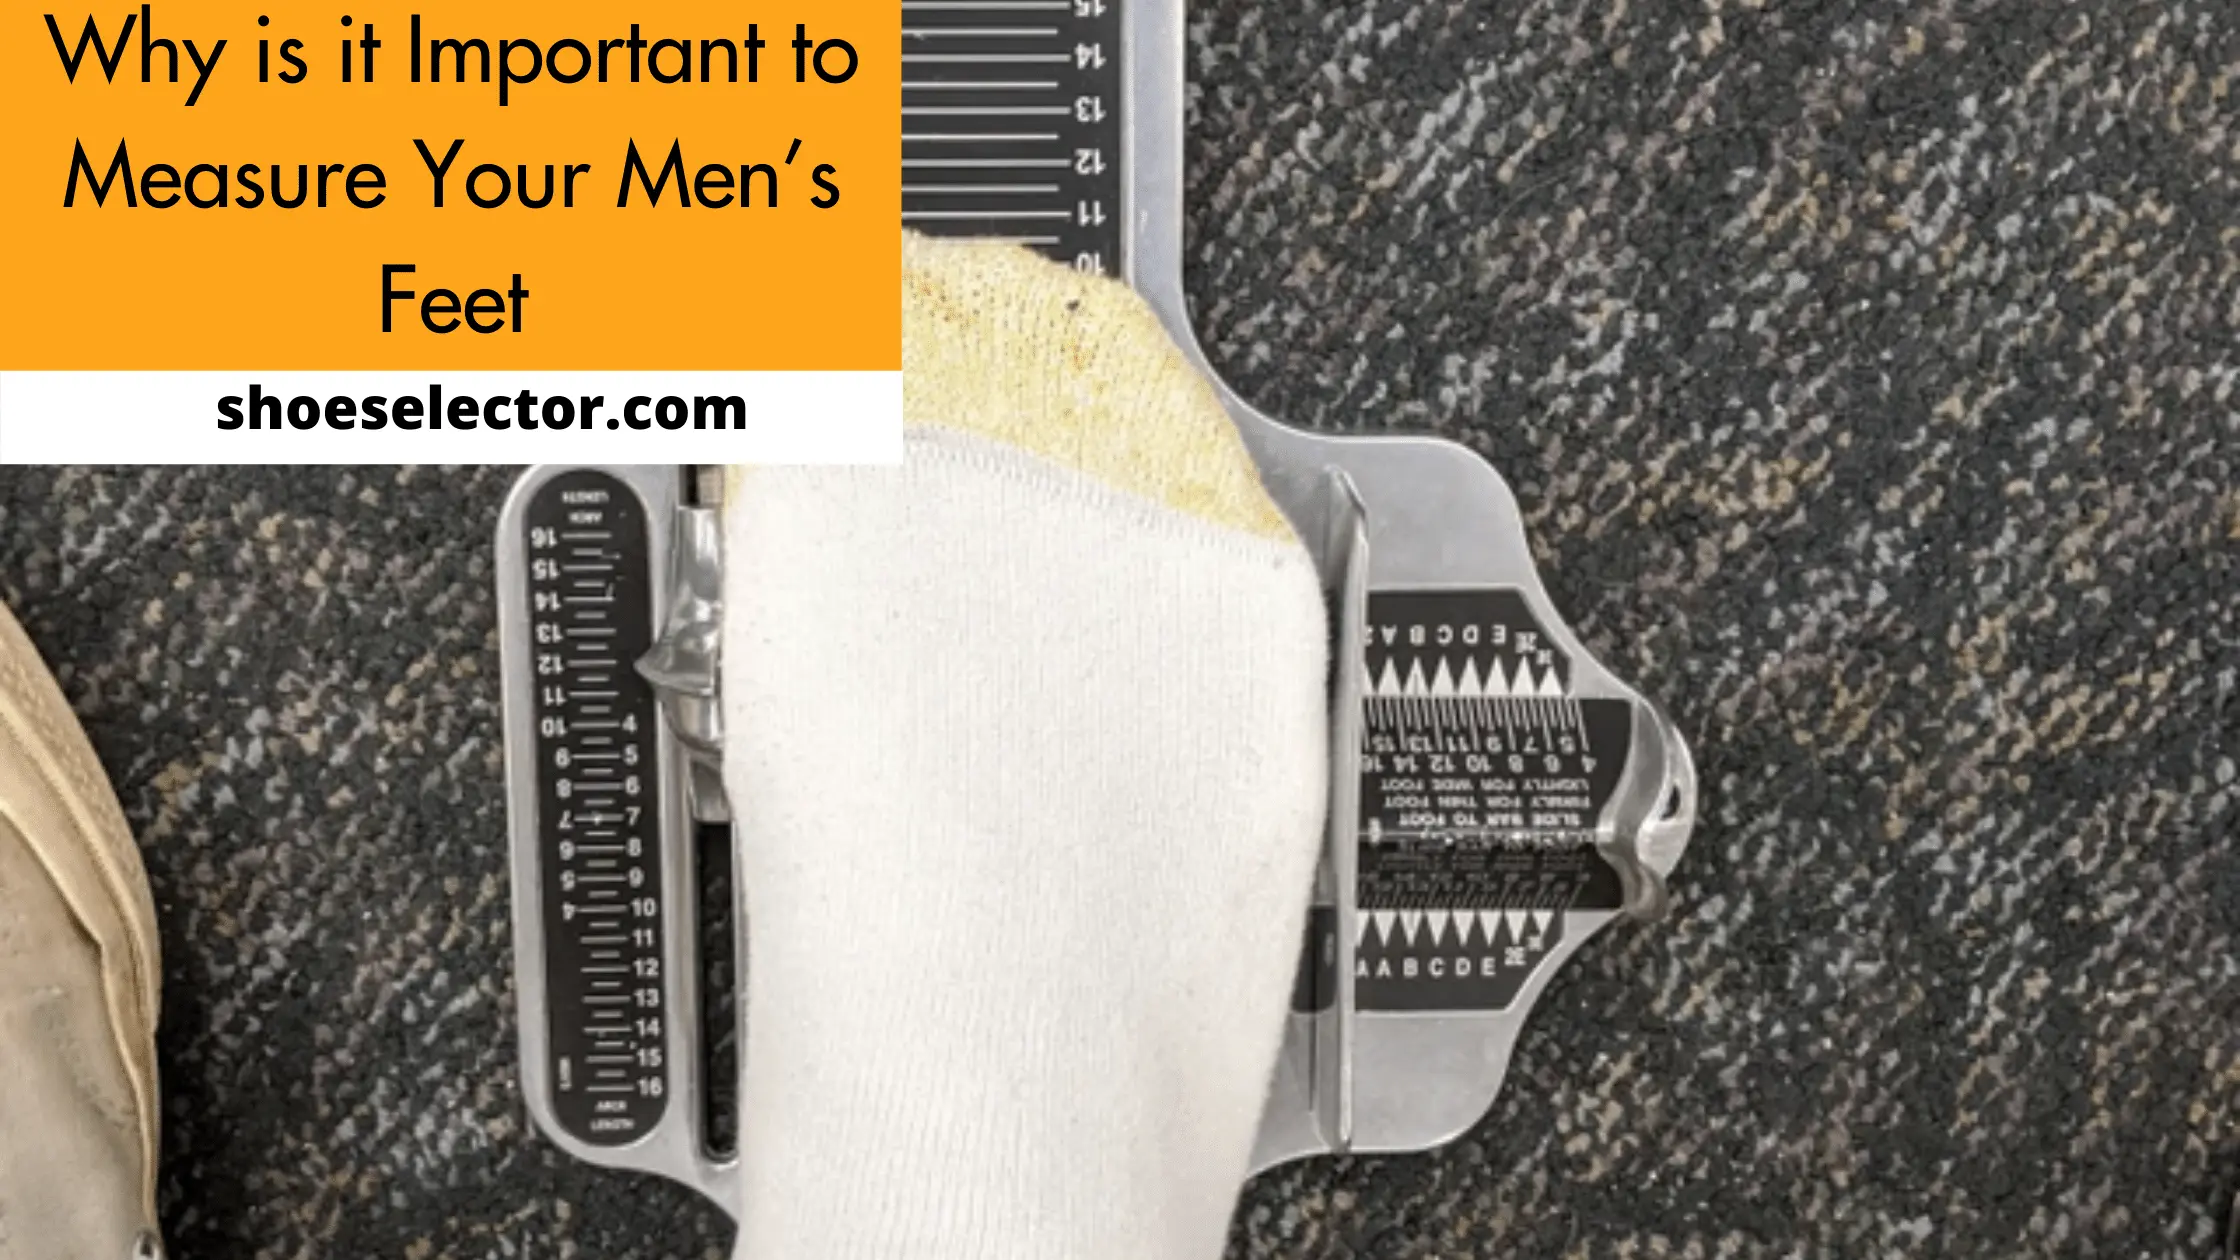 Why is it Important to Measure Your Men’s Feet?